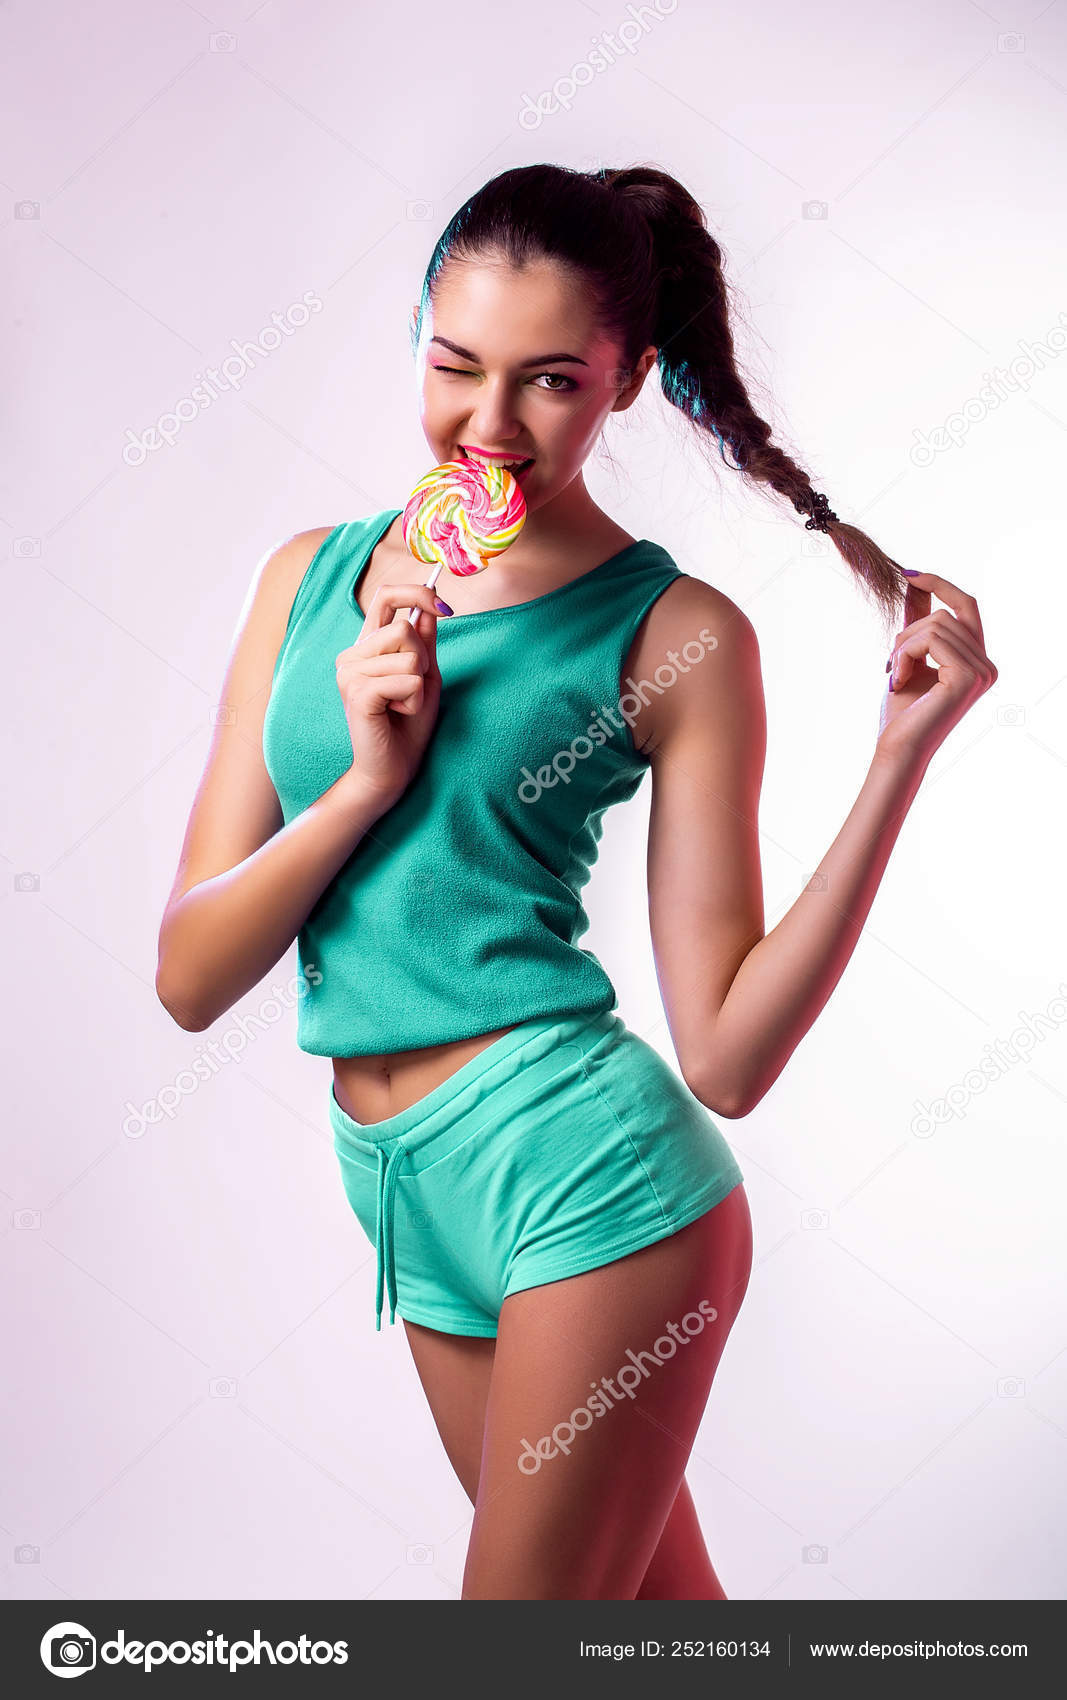 Funny young girl in green jumpsuit holding lollipop and posing for camera  onwhite background. Stock Photo by ©zamuruev 252160134